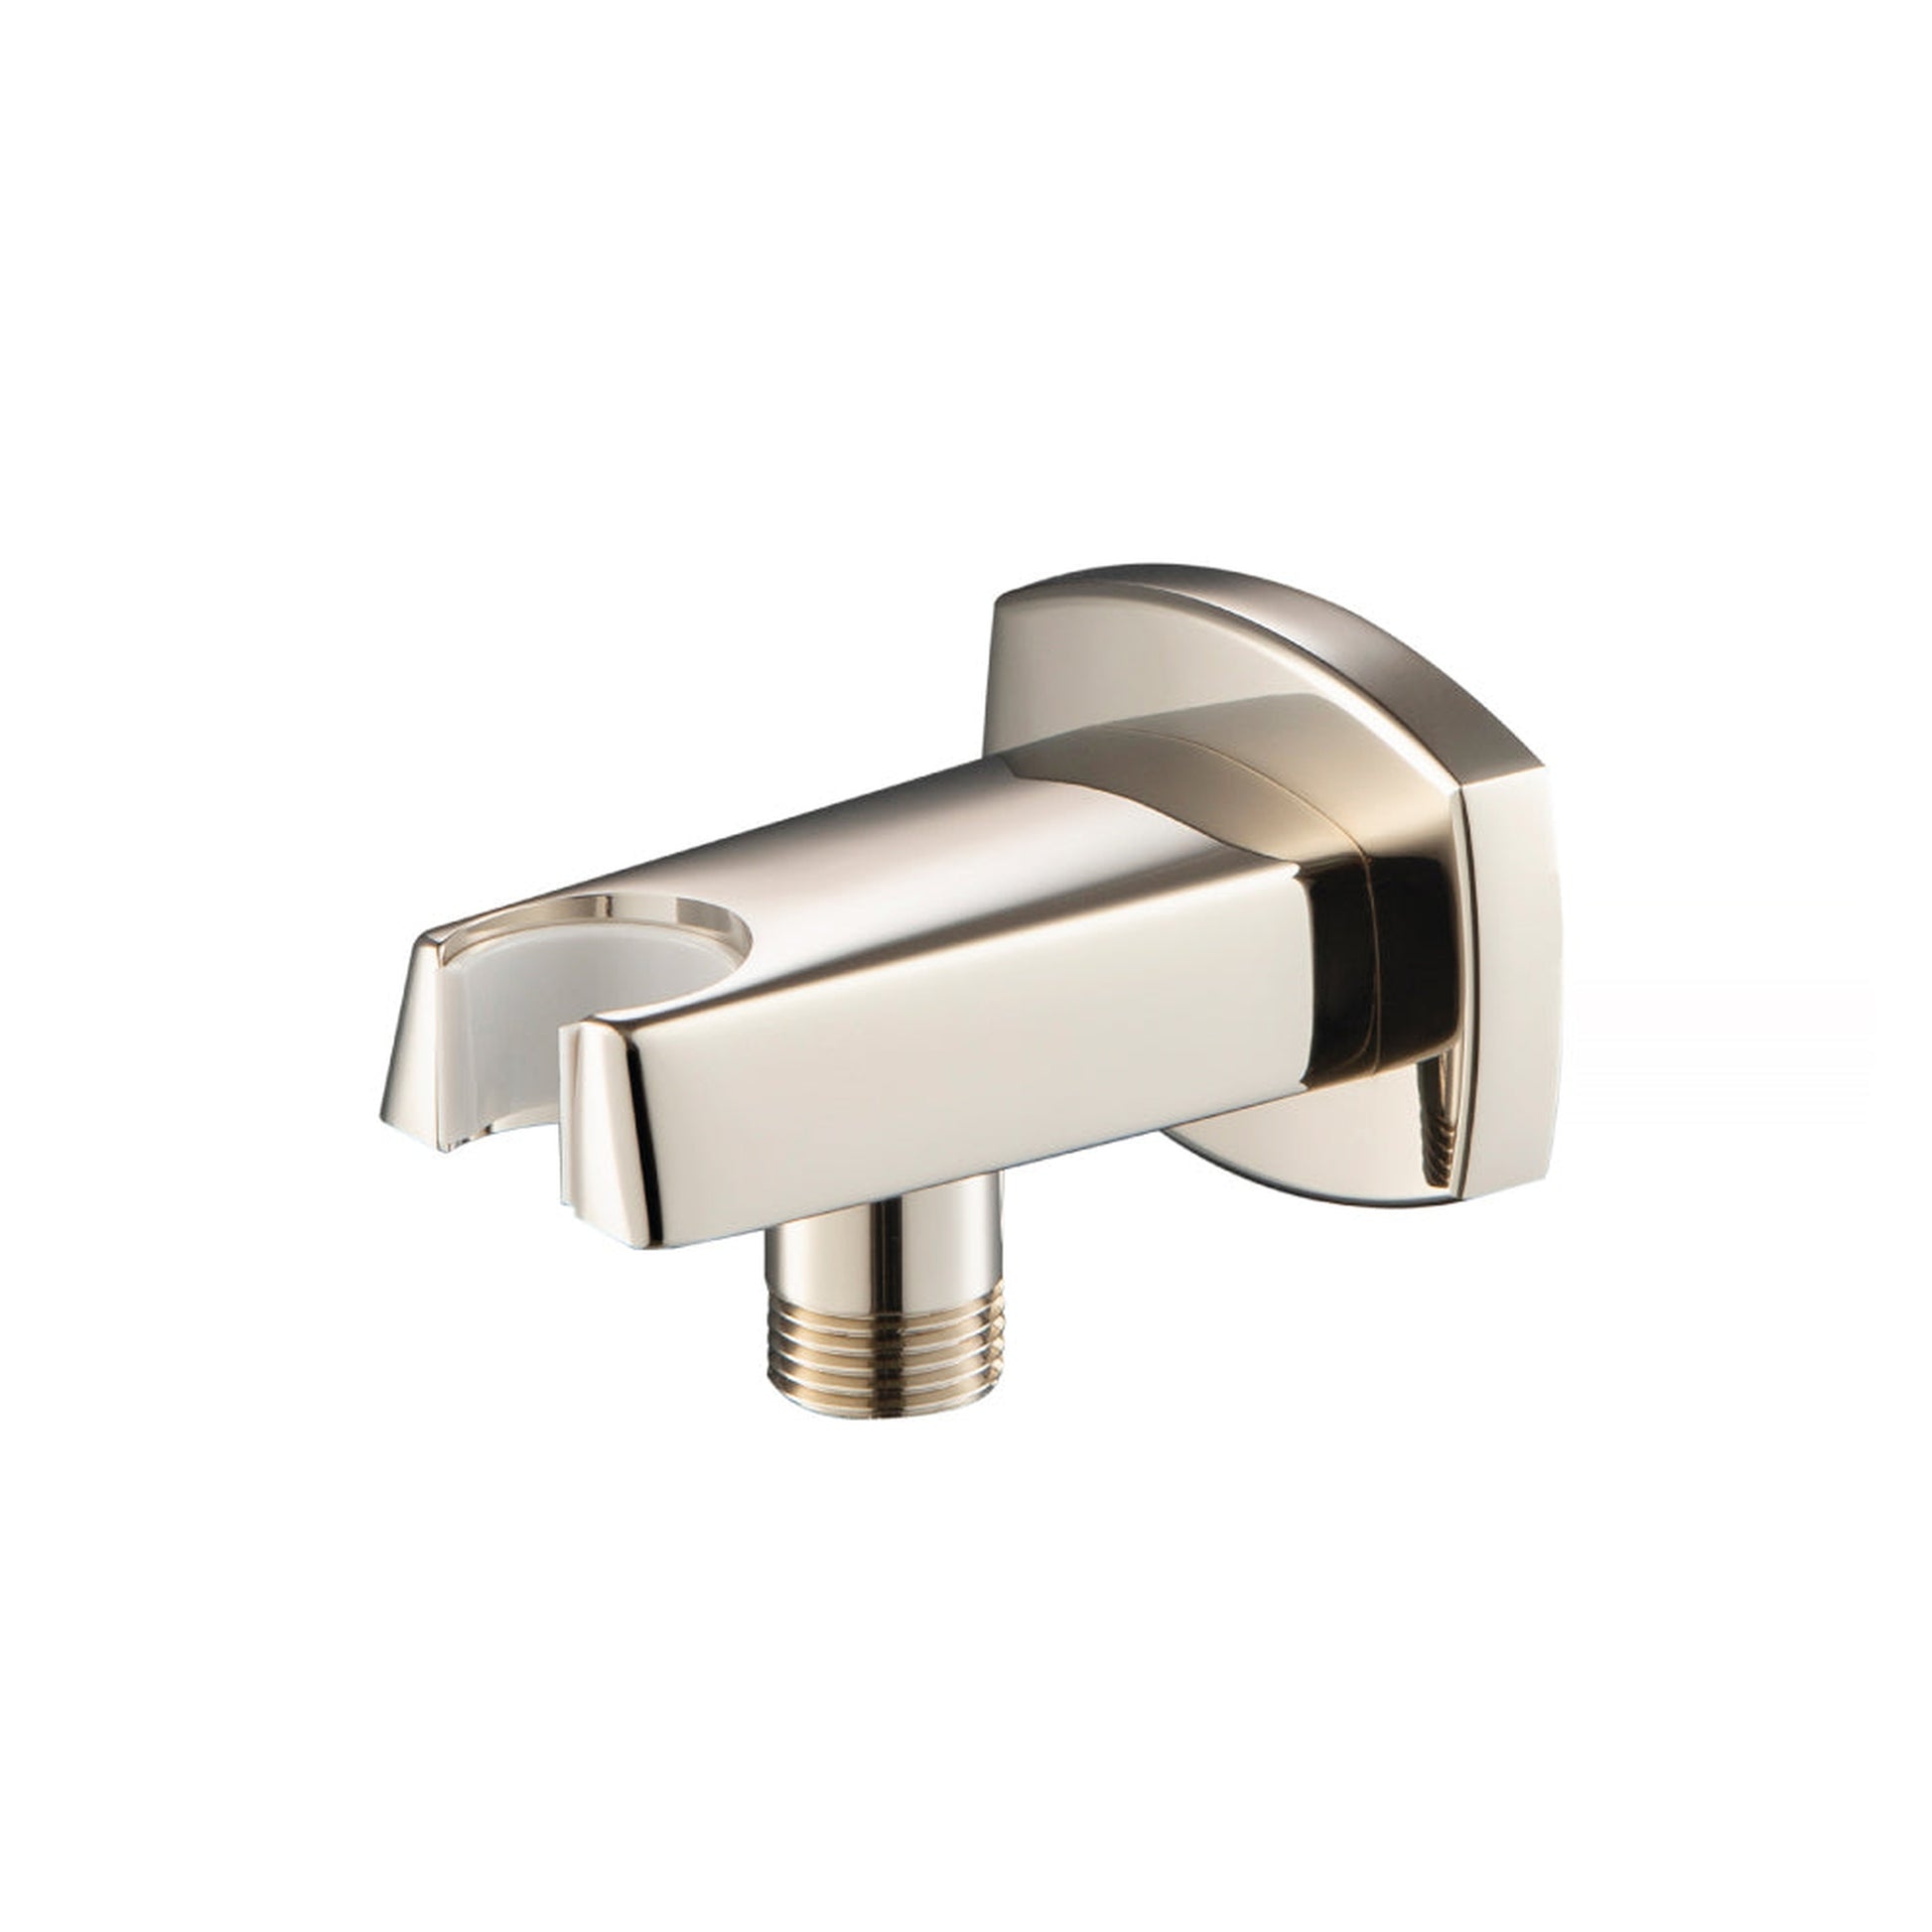 Isenberg Serie 240 Wall Elbow With Combo Holder in Polished Nickel